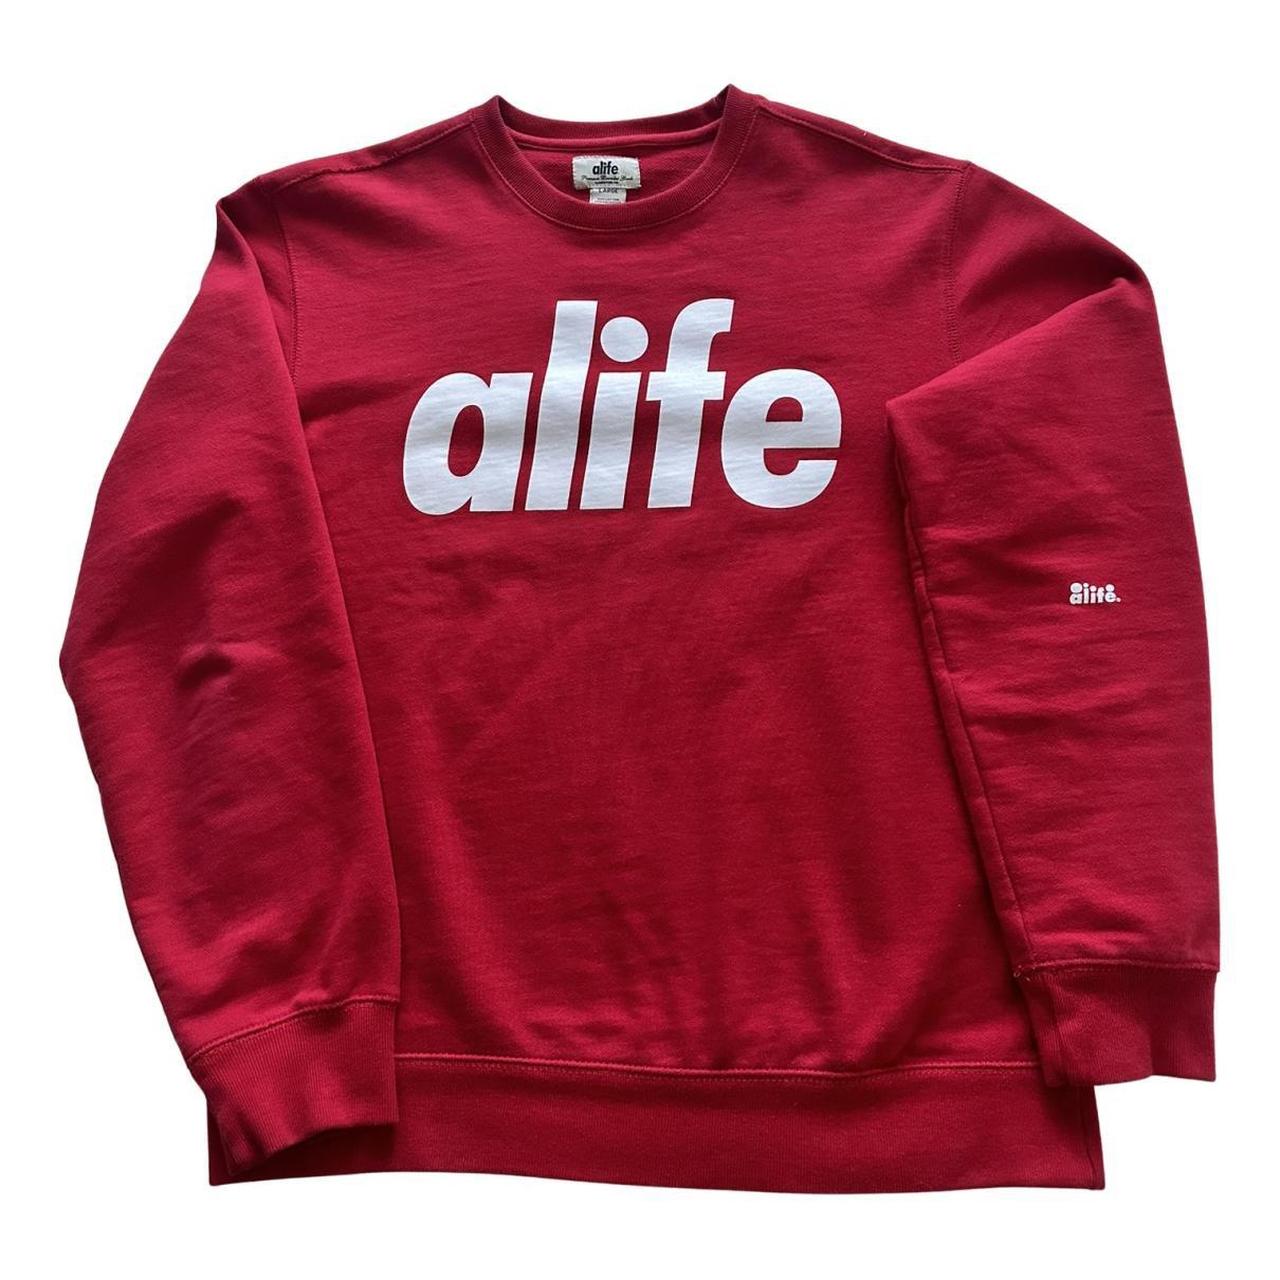 Alife | Preowned & Secondhand Fashion Depop 